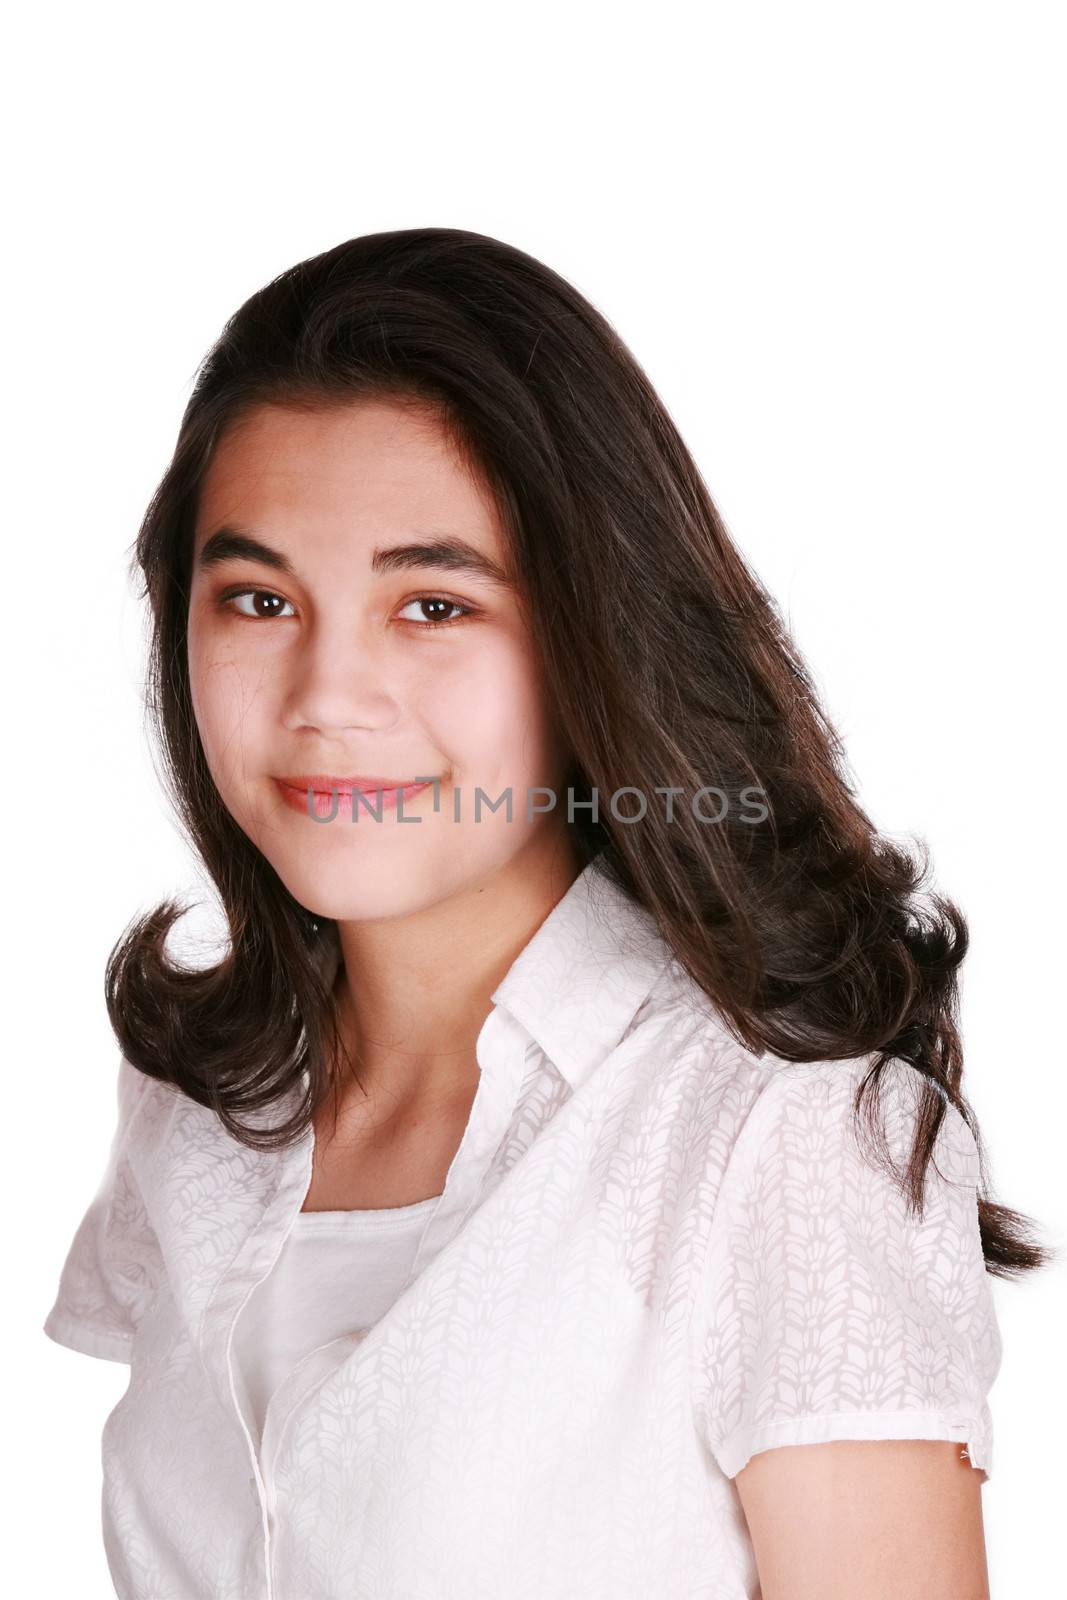 Beautiful biracial teen girl smiling, confident expression by jarenwicklund